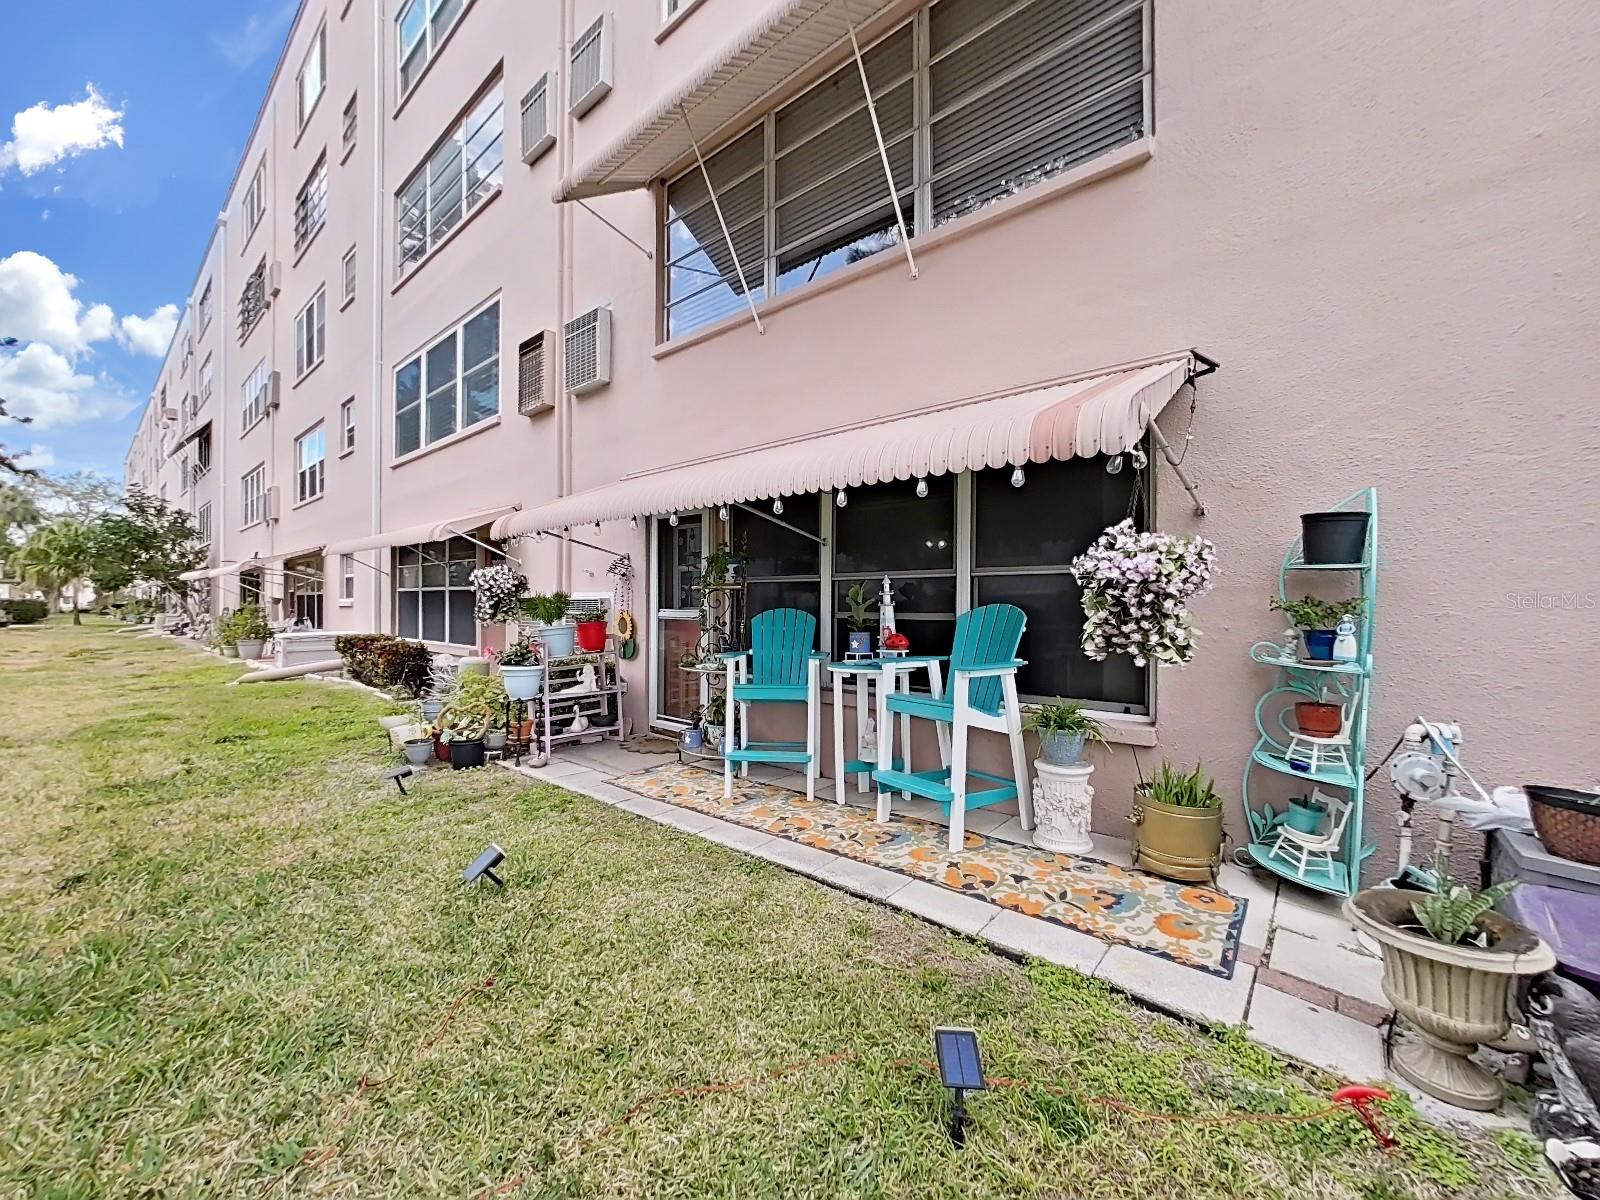 Open to the courtyard! Pet friendly to take walks and have a little outdoor time!